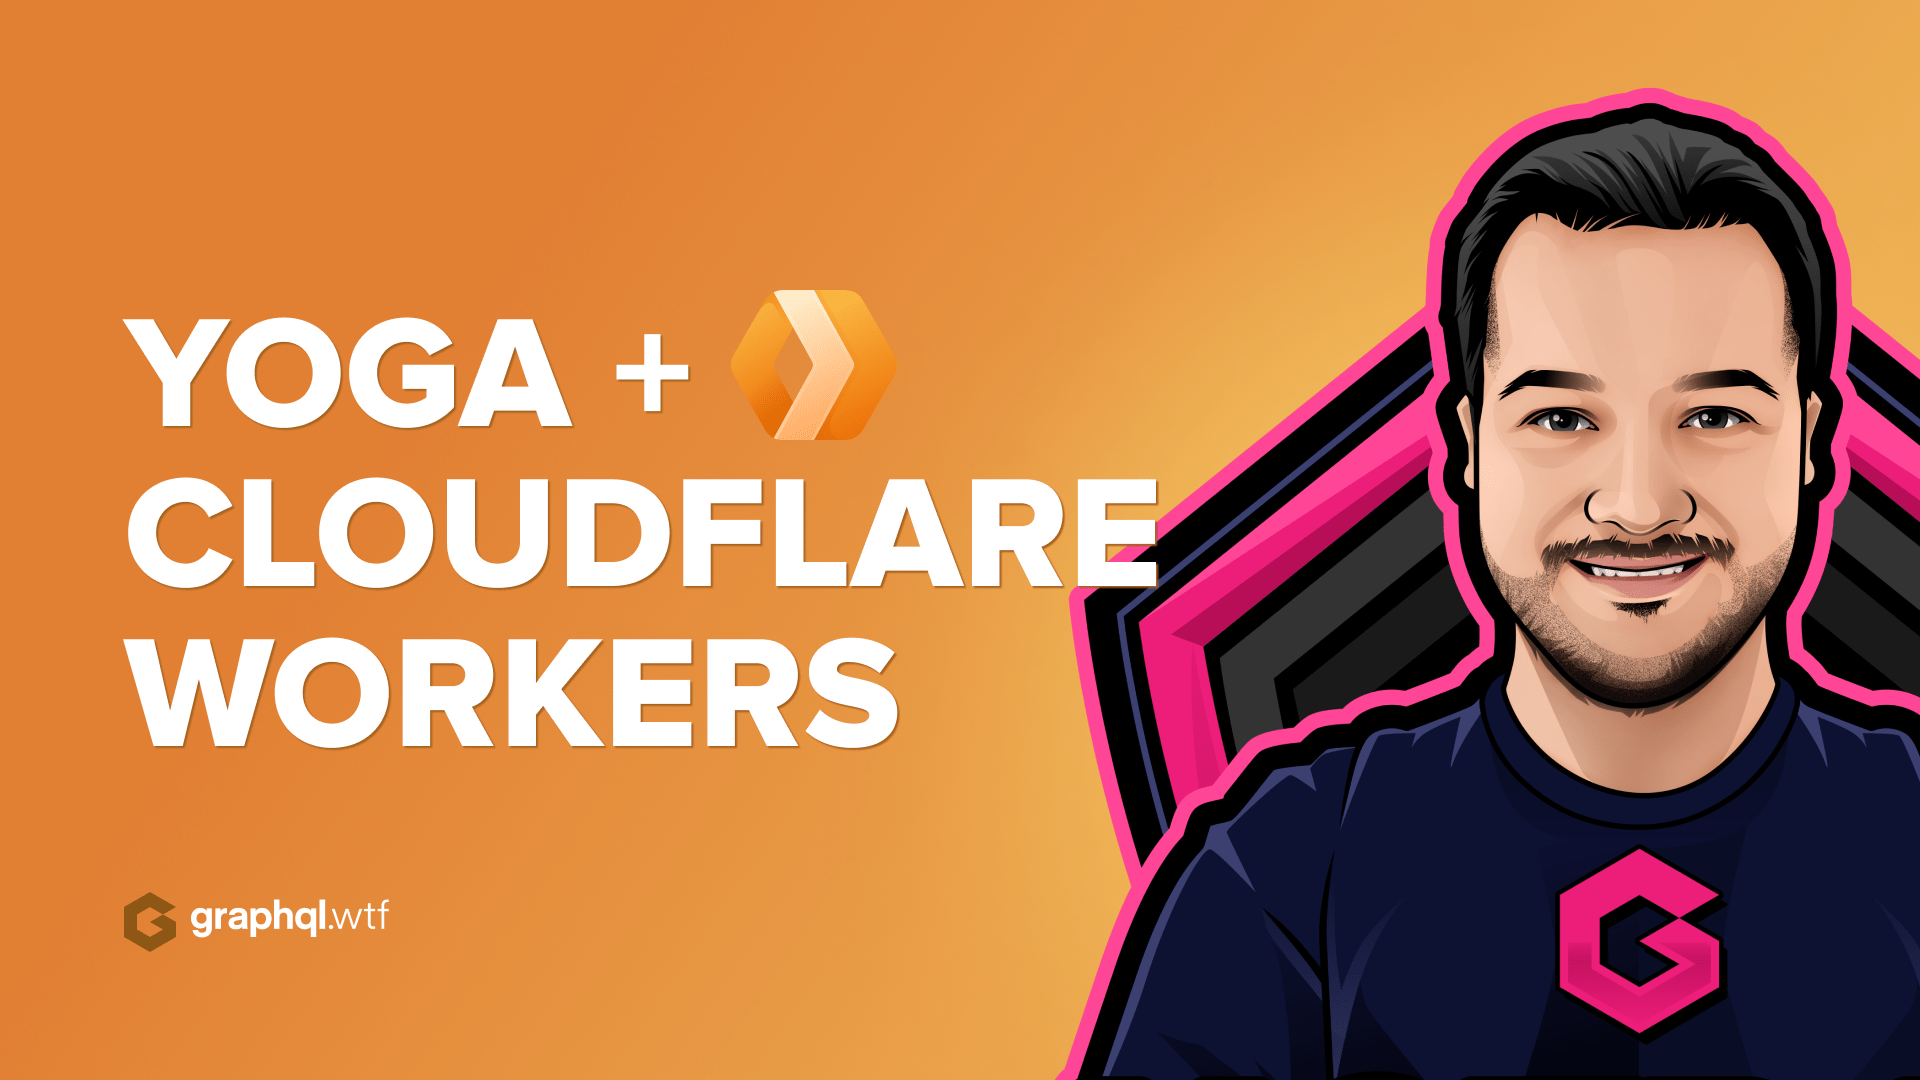 GraphQL Yoga 3 with Cloudflare Workers